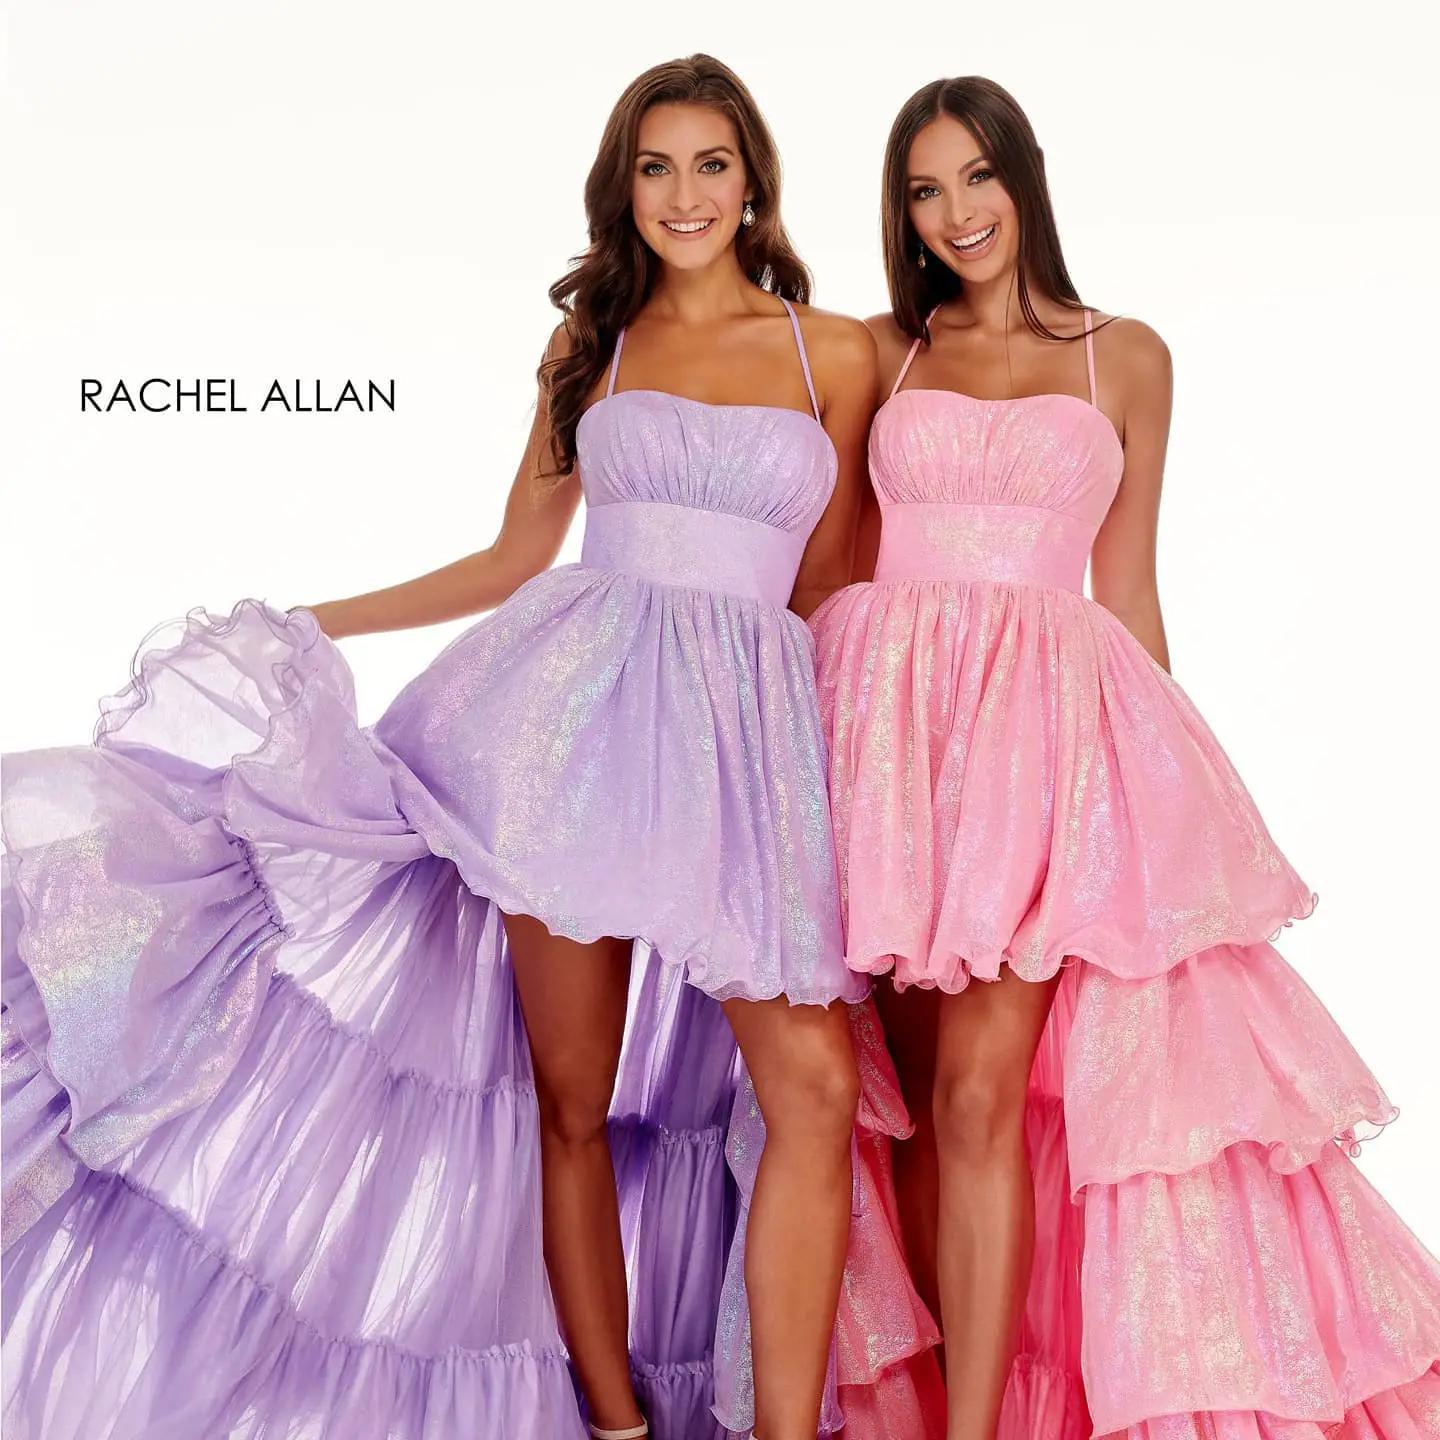 Models wearing a color gowns